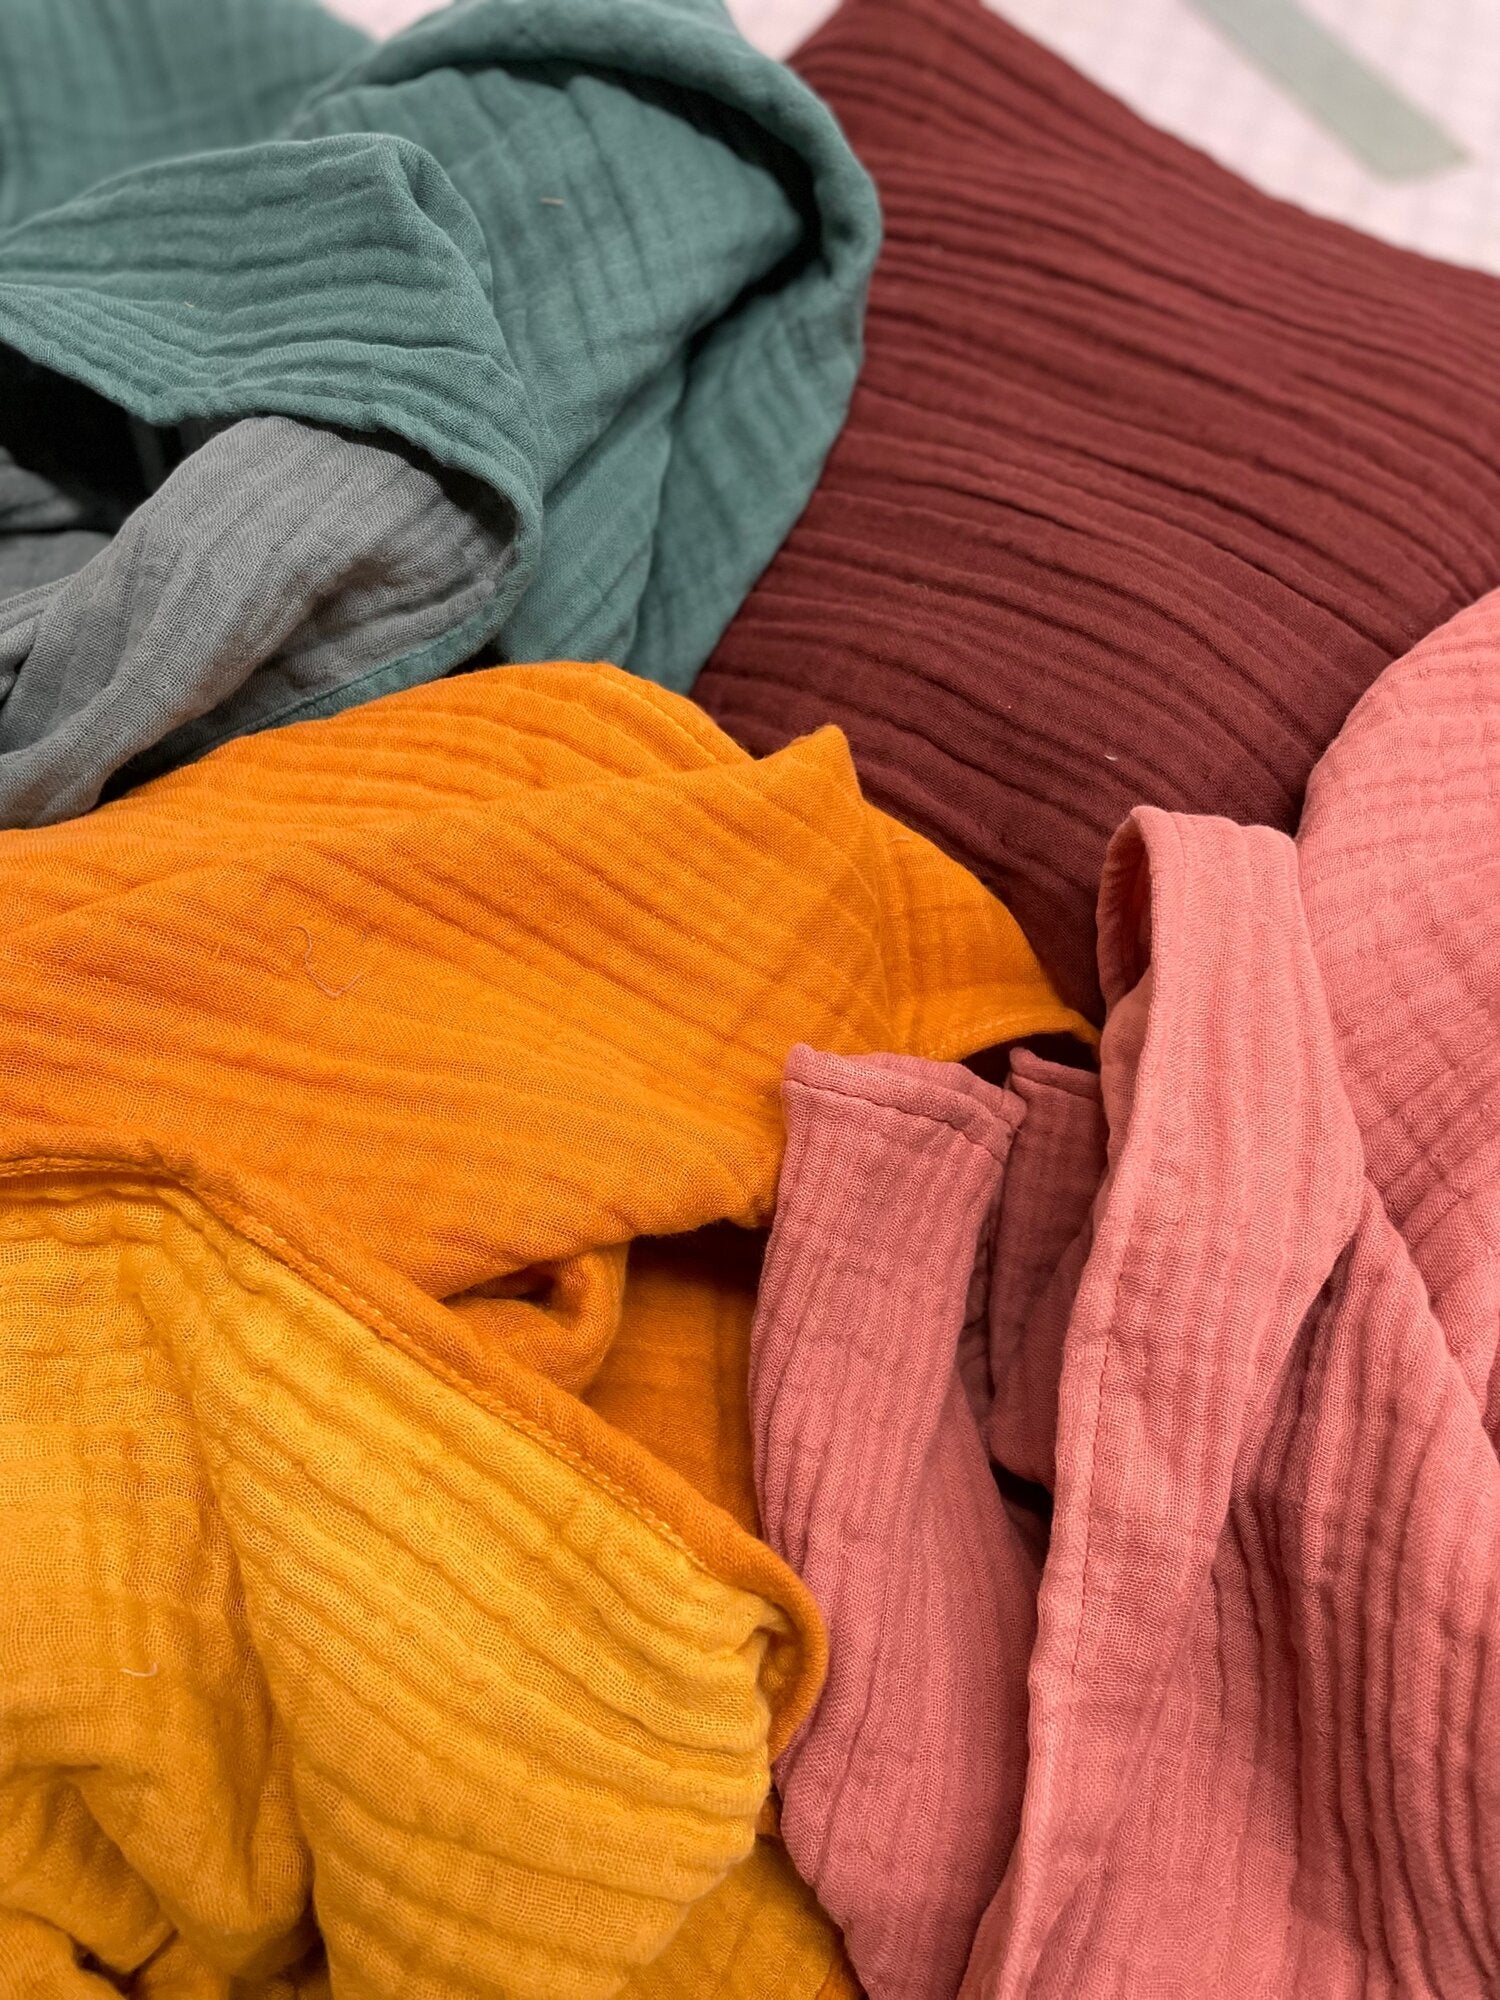 All colors of gauzy scarf shown together